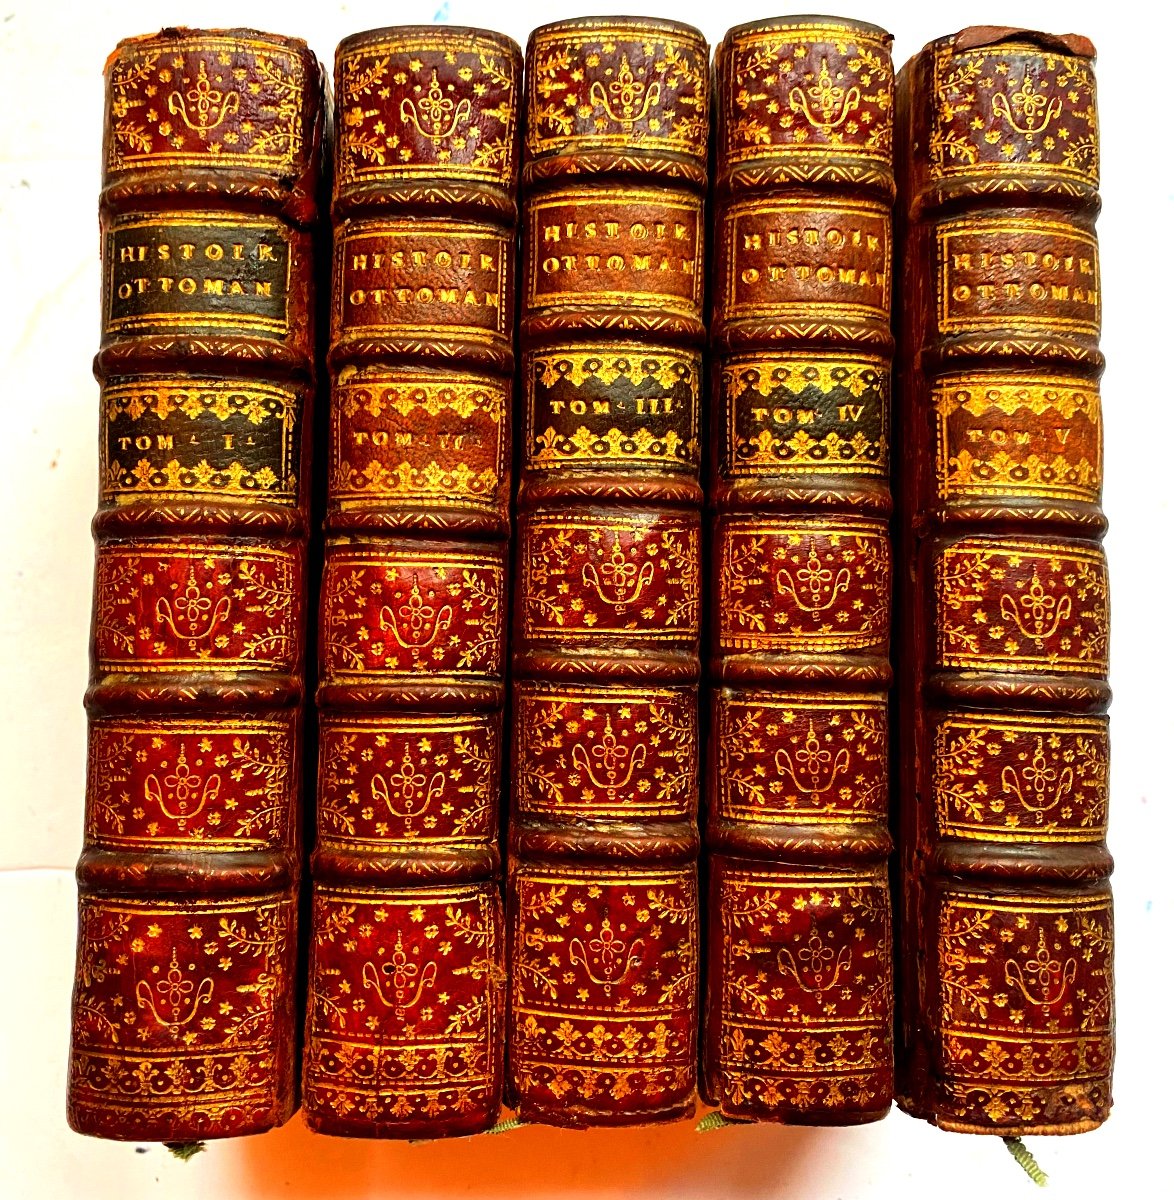 In A Rich Red Morocco Spine Binding "history Of The Ottoman Empire" By Sagrédo 1724.